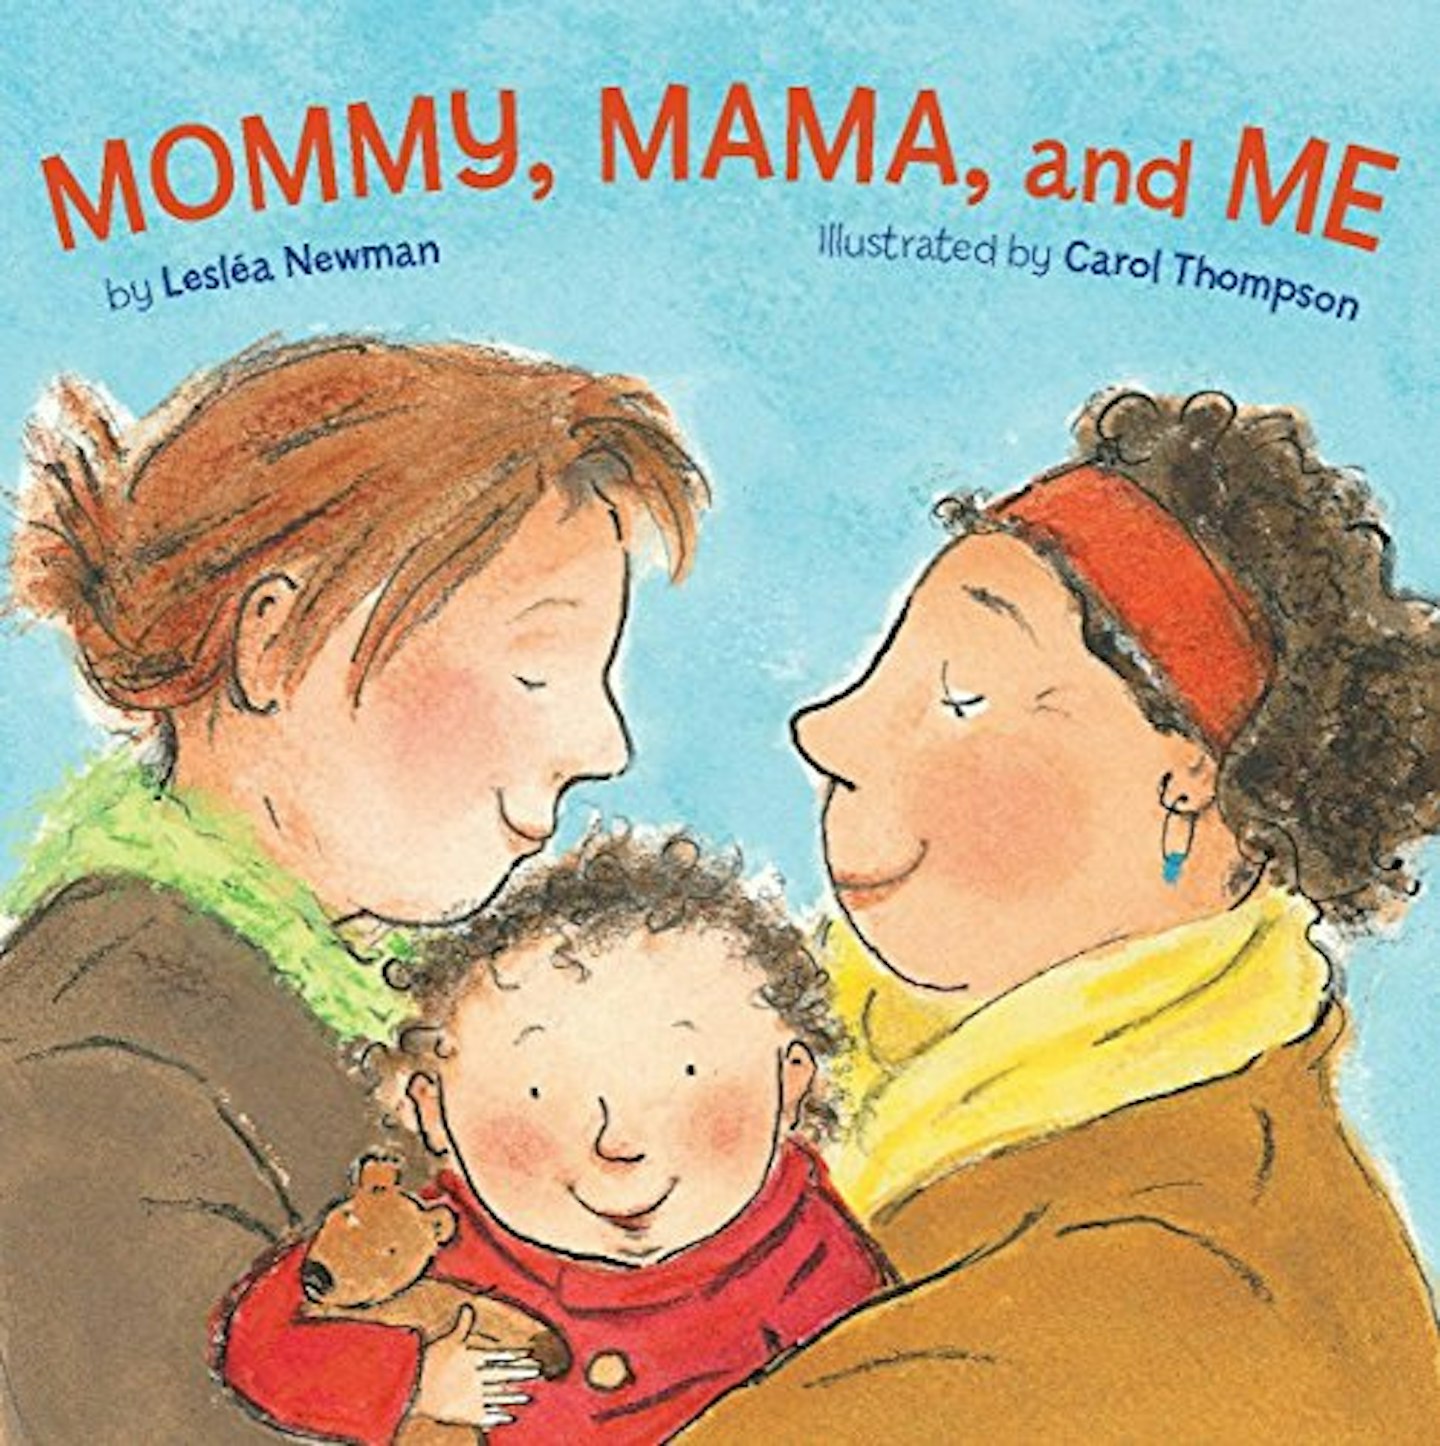 Mommy, Mama and Me, Leslea Newman